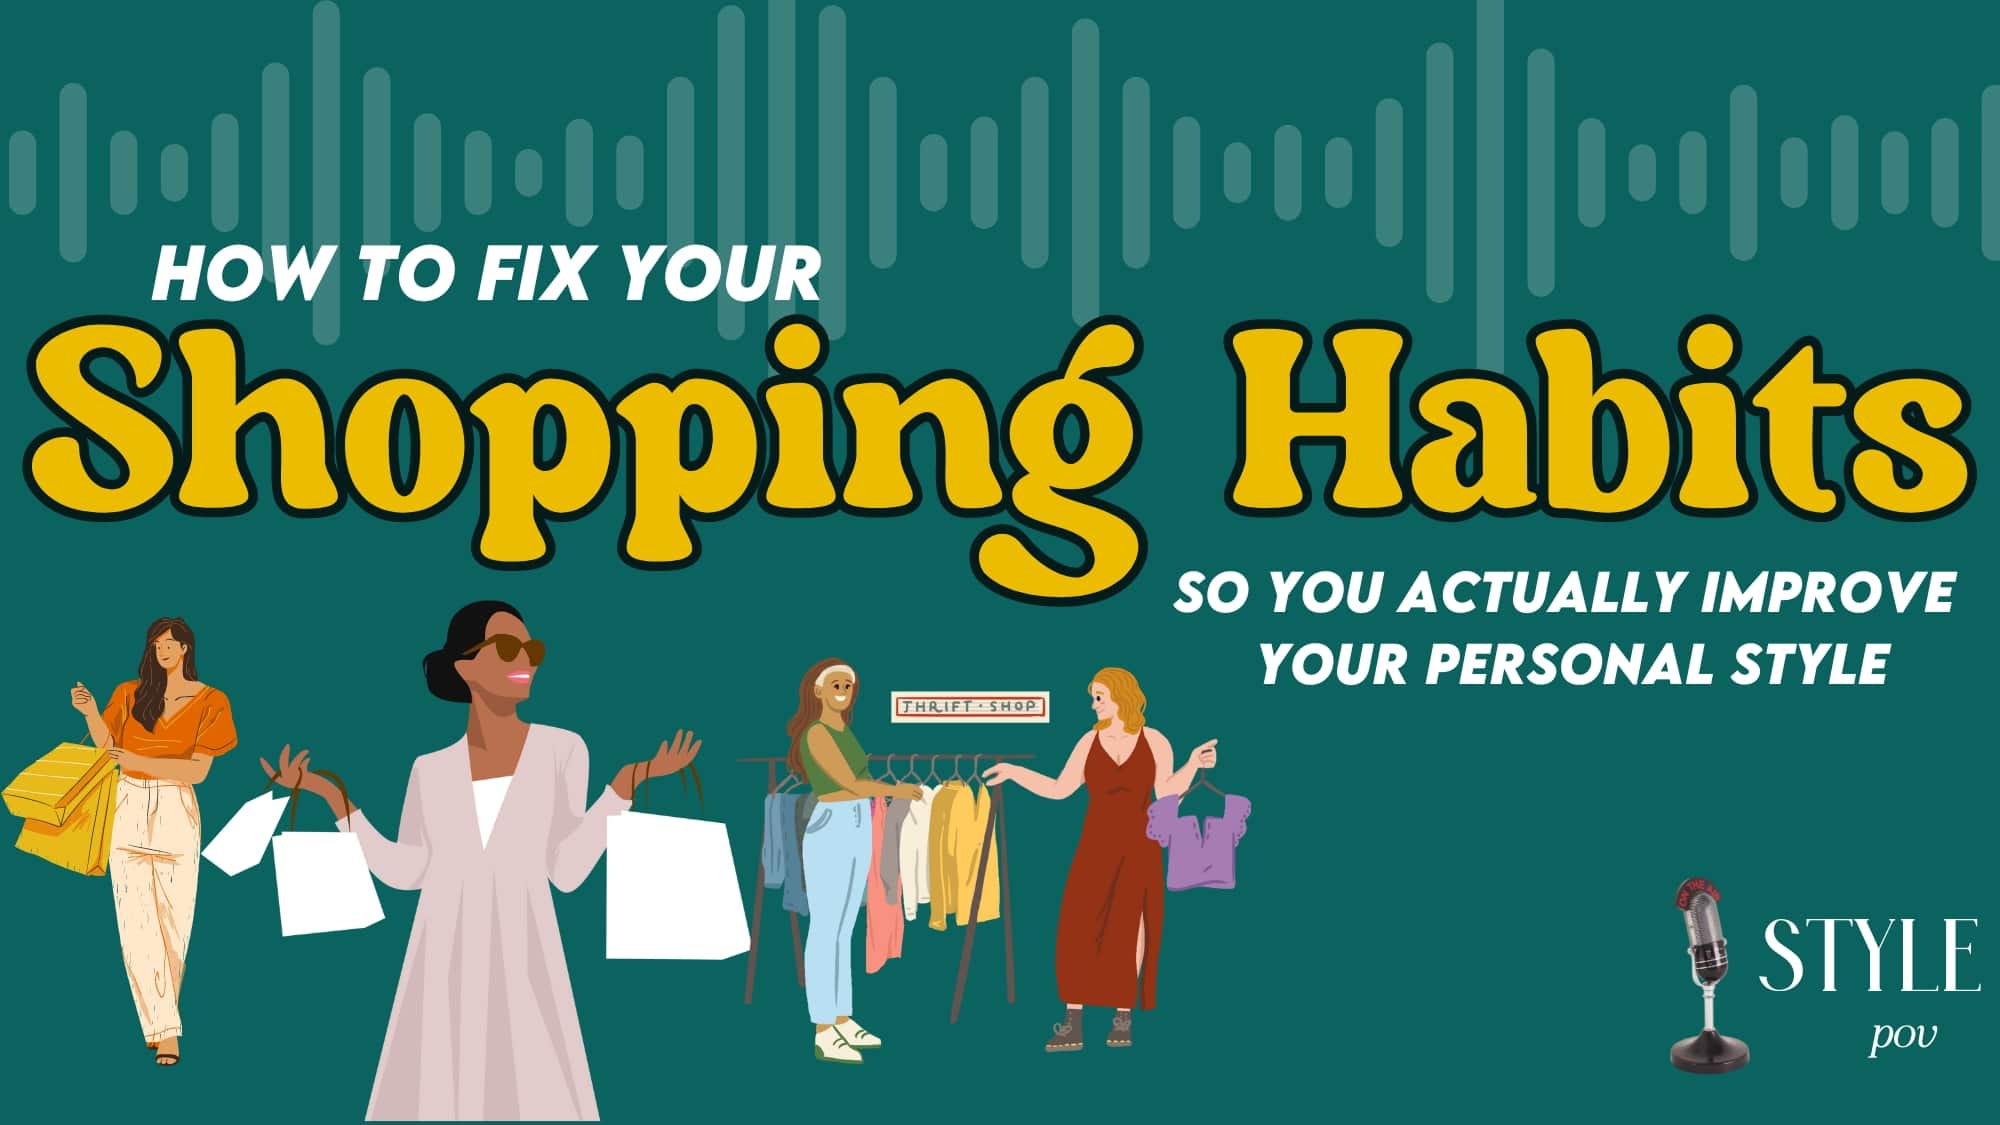 Are These Shopping Habits Thwarting Your Personal Style? (ep. 3)